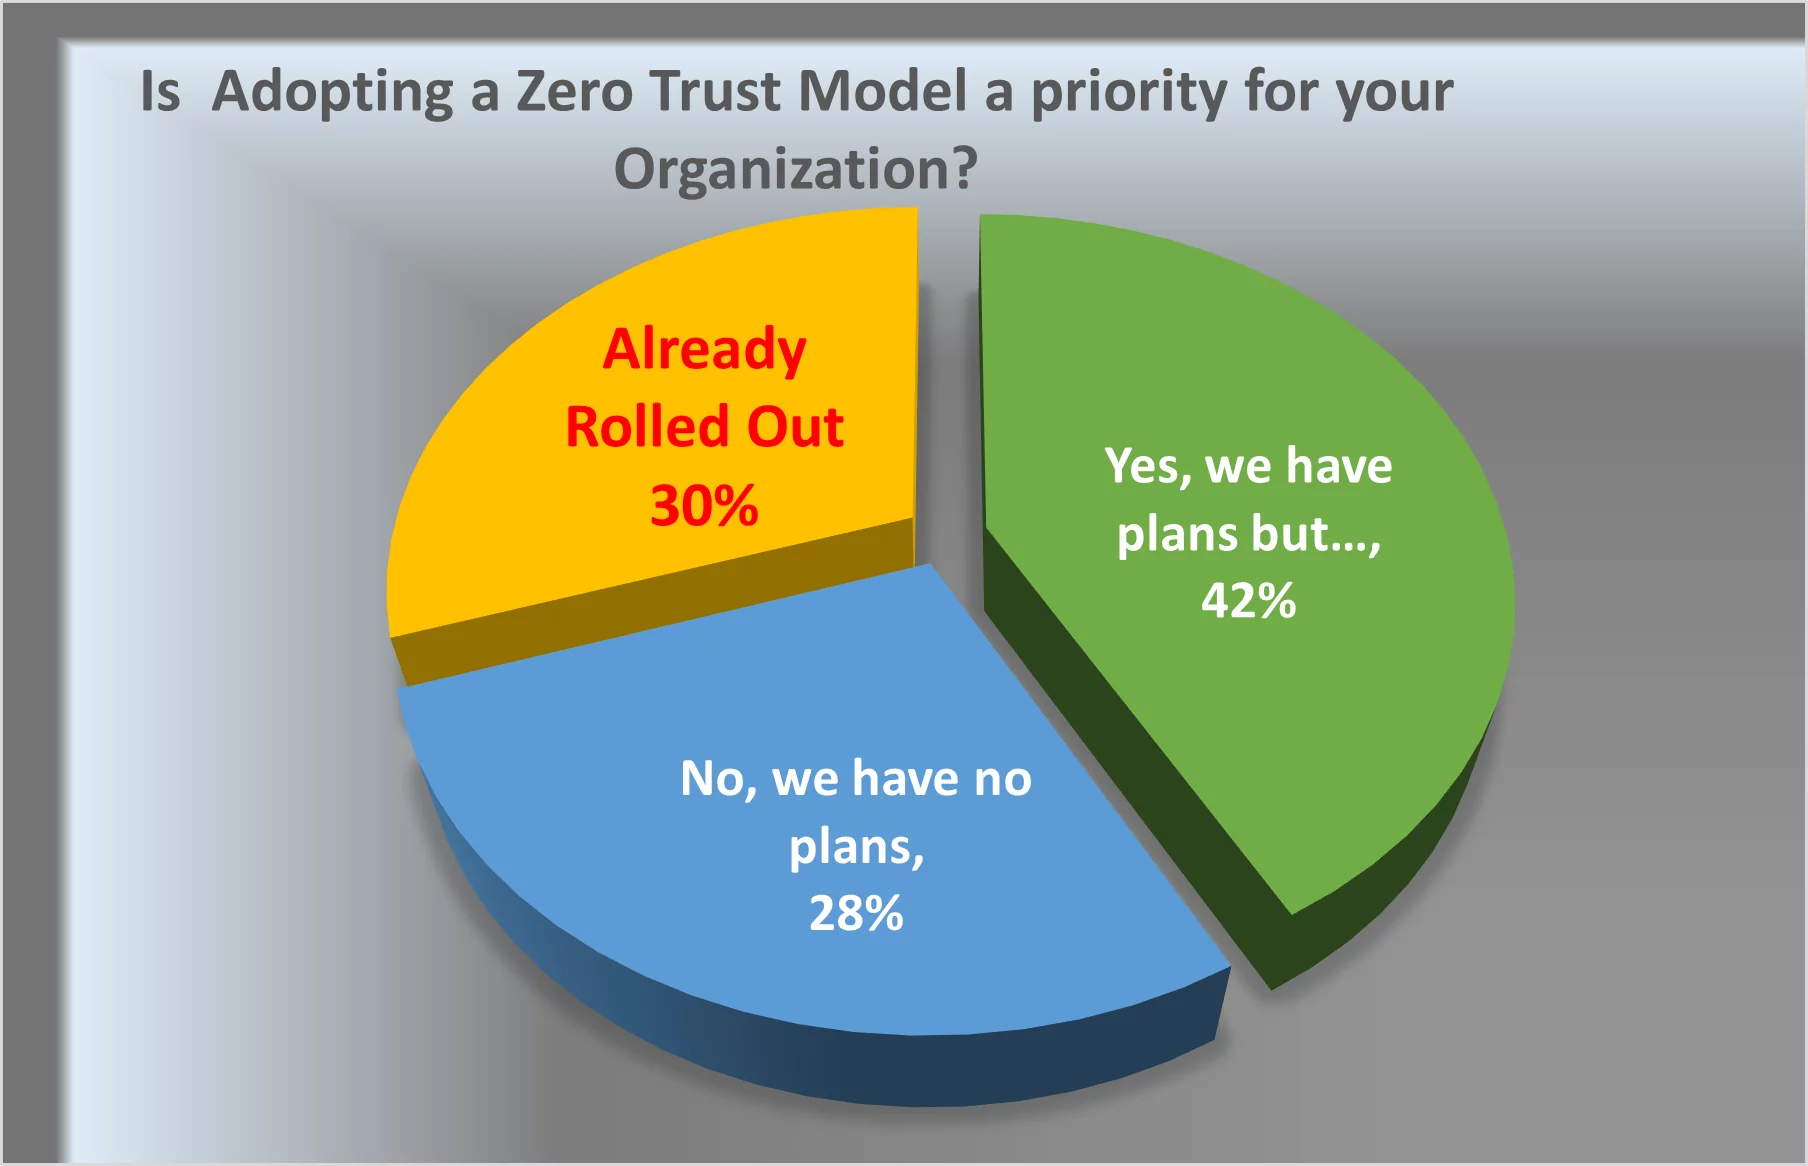 Is adopting a Zero Trust Model a priority for your organization Is adopting a Zero Trust Model a priority for your organization Is adopting a Zero Trust Model a priority for your organization